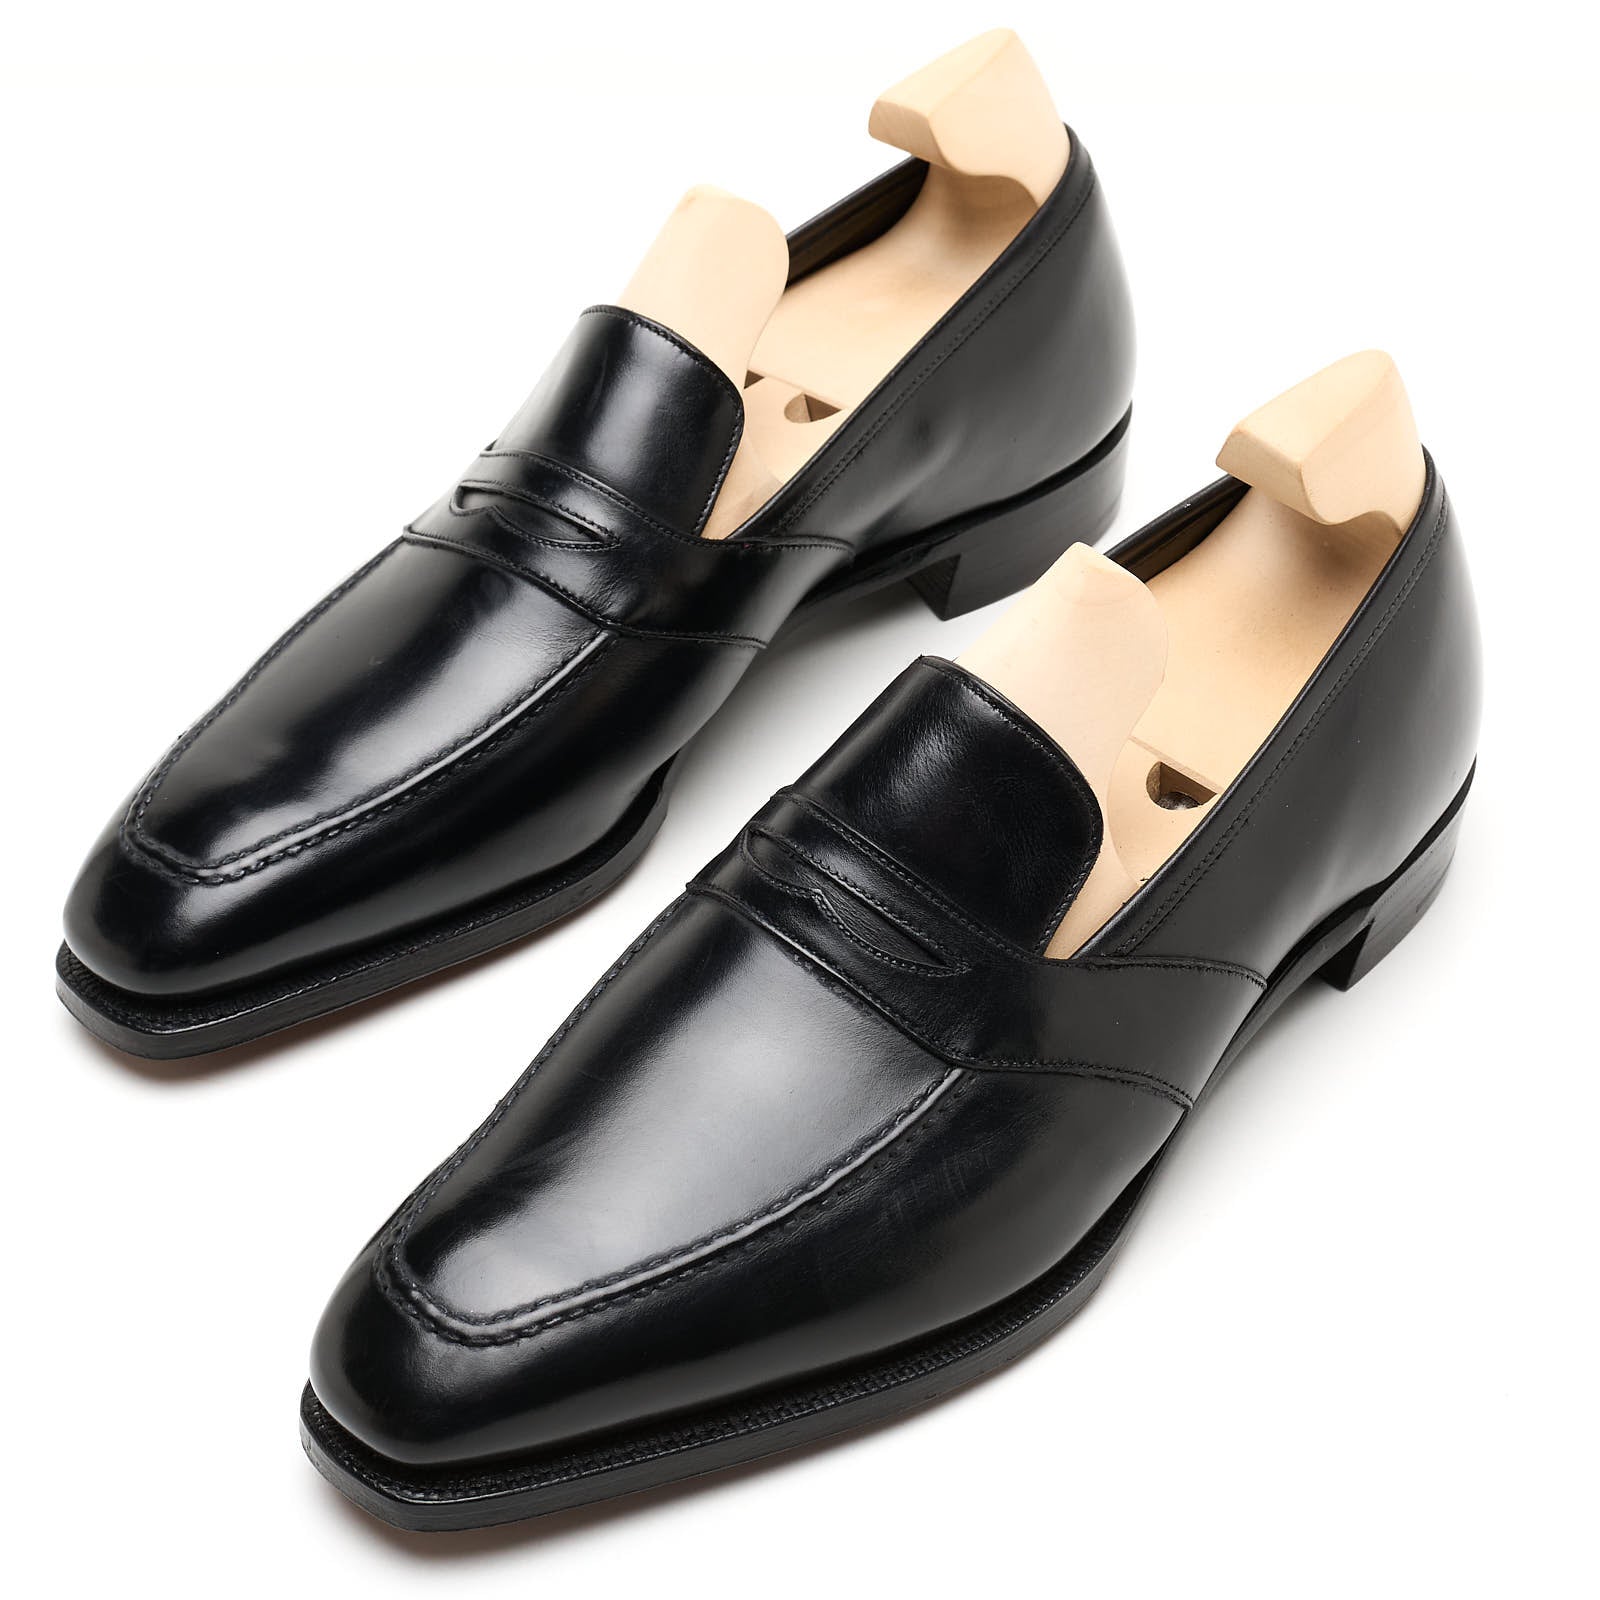 GEORGE CLEVERLEY "Bradley" Black Leather Loafers Dress Shoes UK 7.5 NEW US 8